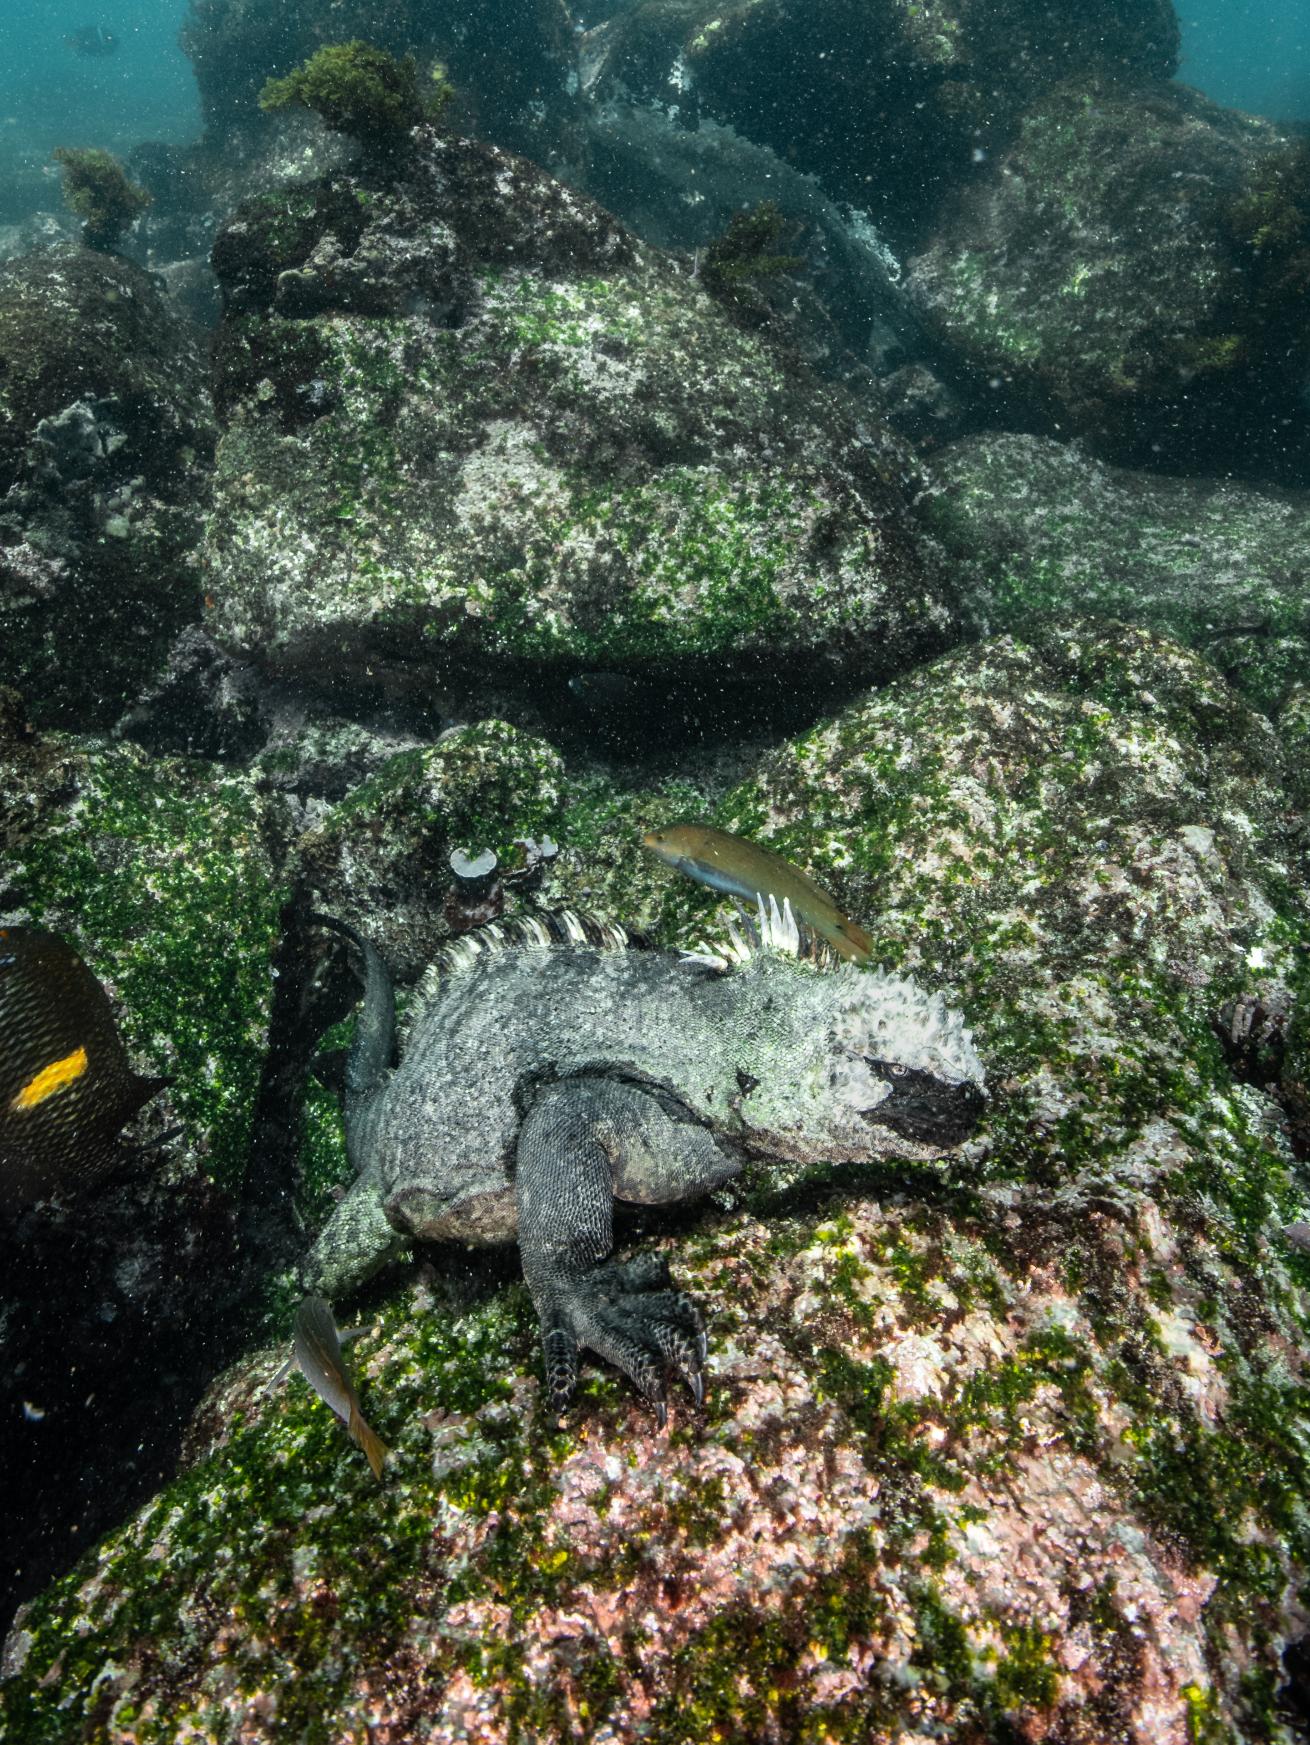 An iguana in the water